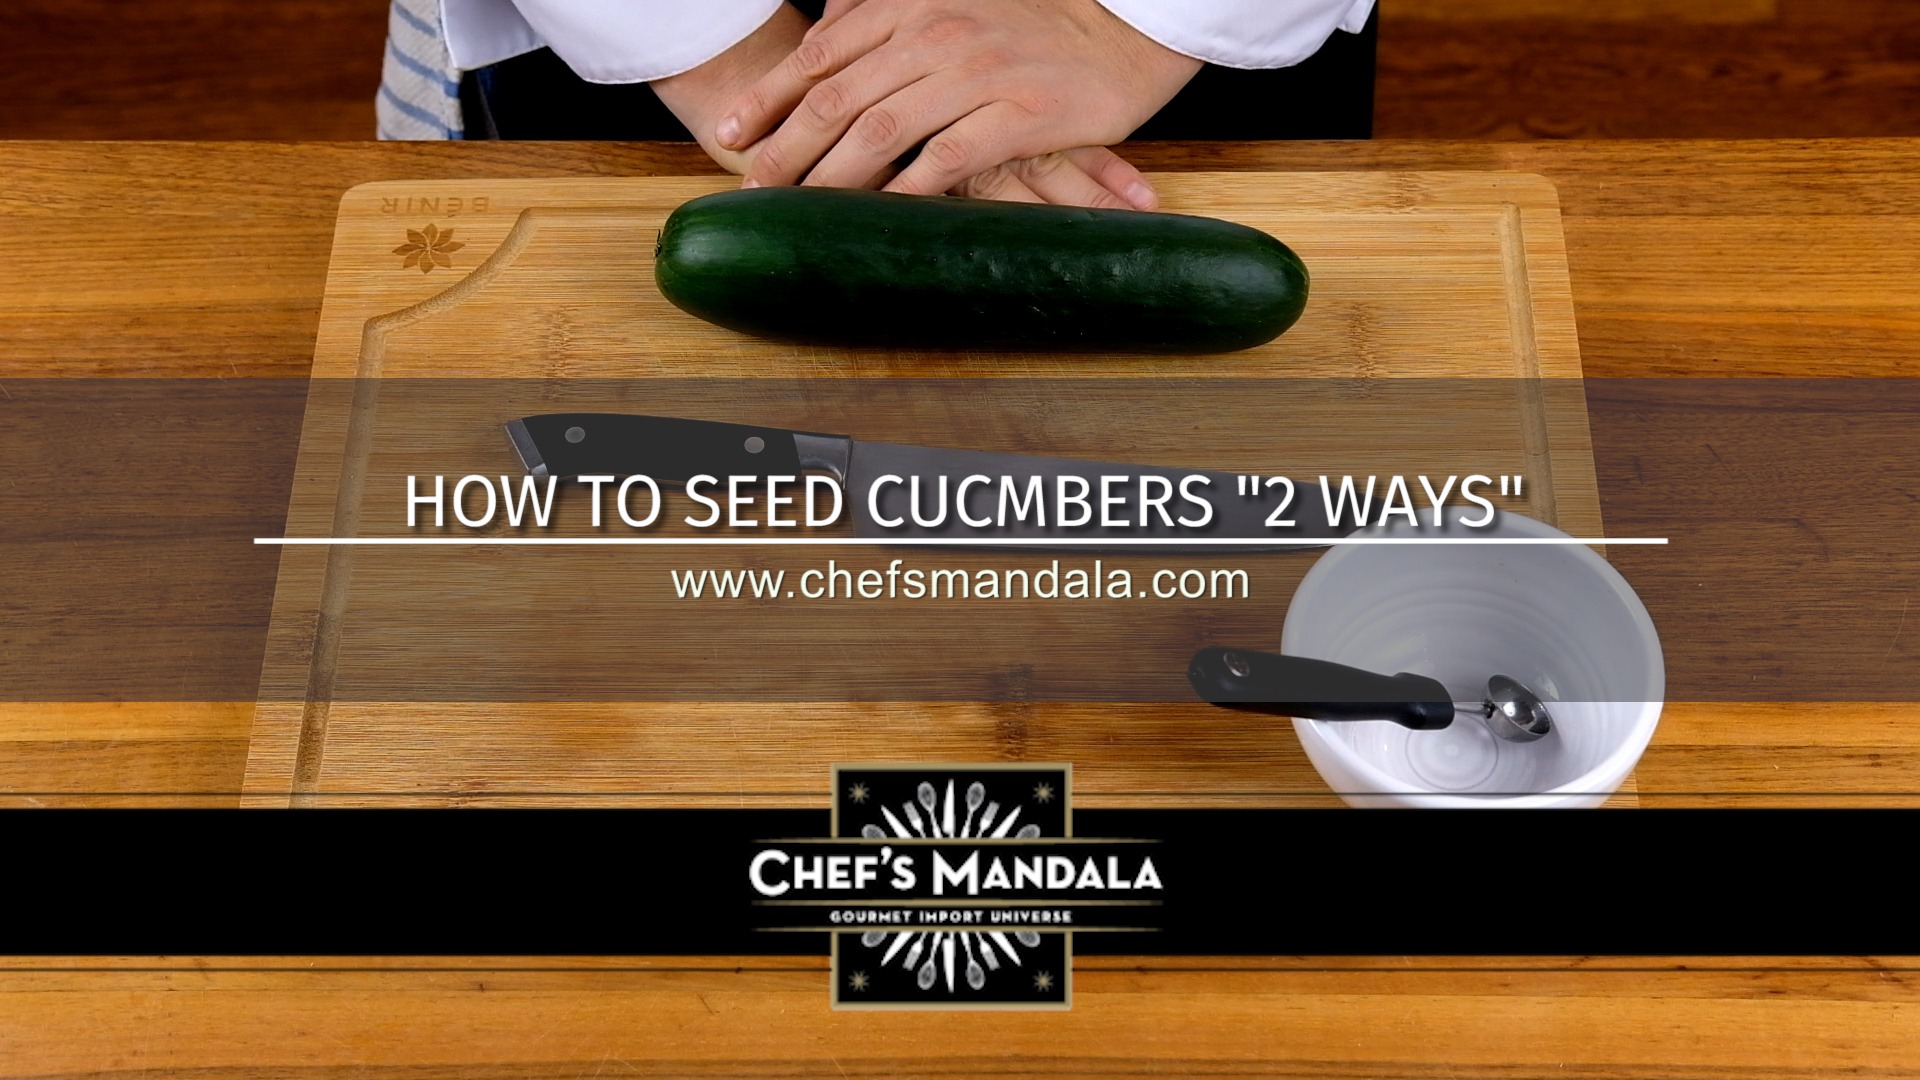 HOW TO SEED CUCUMBERS 2 Ways